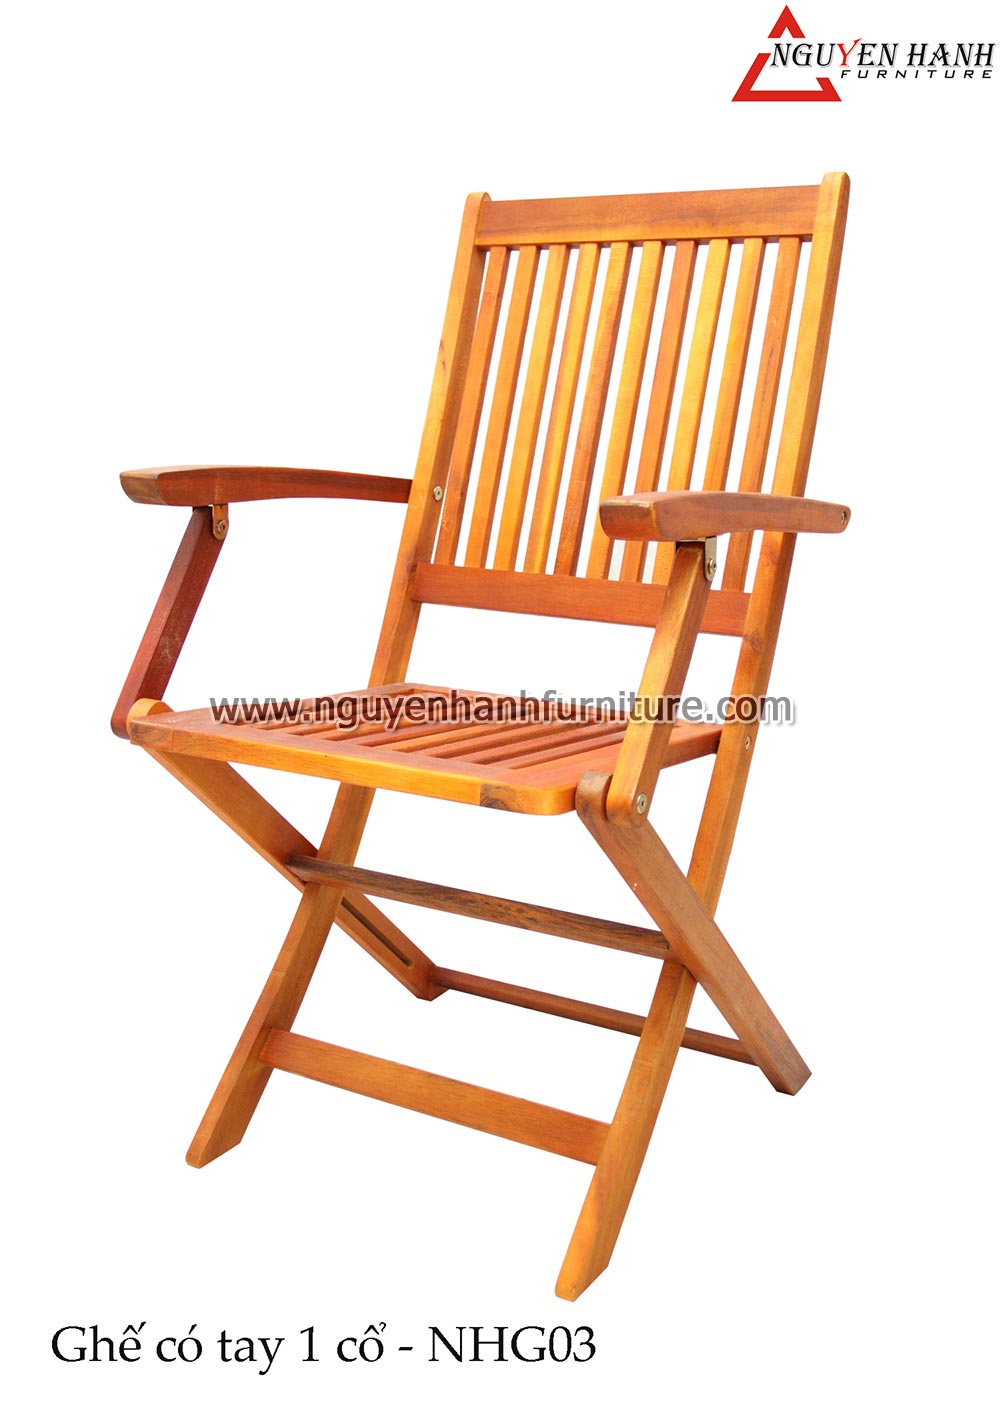 Name product: Wooden chair with single-anchor armrest NHG03 - Dimensions:  - Description: Glue wood